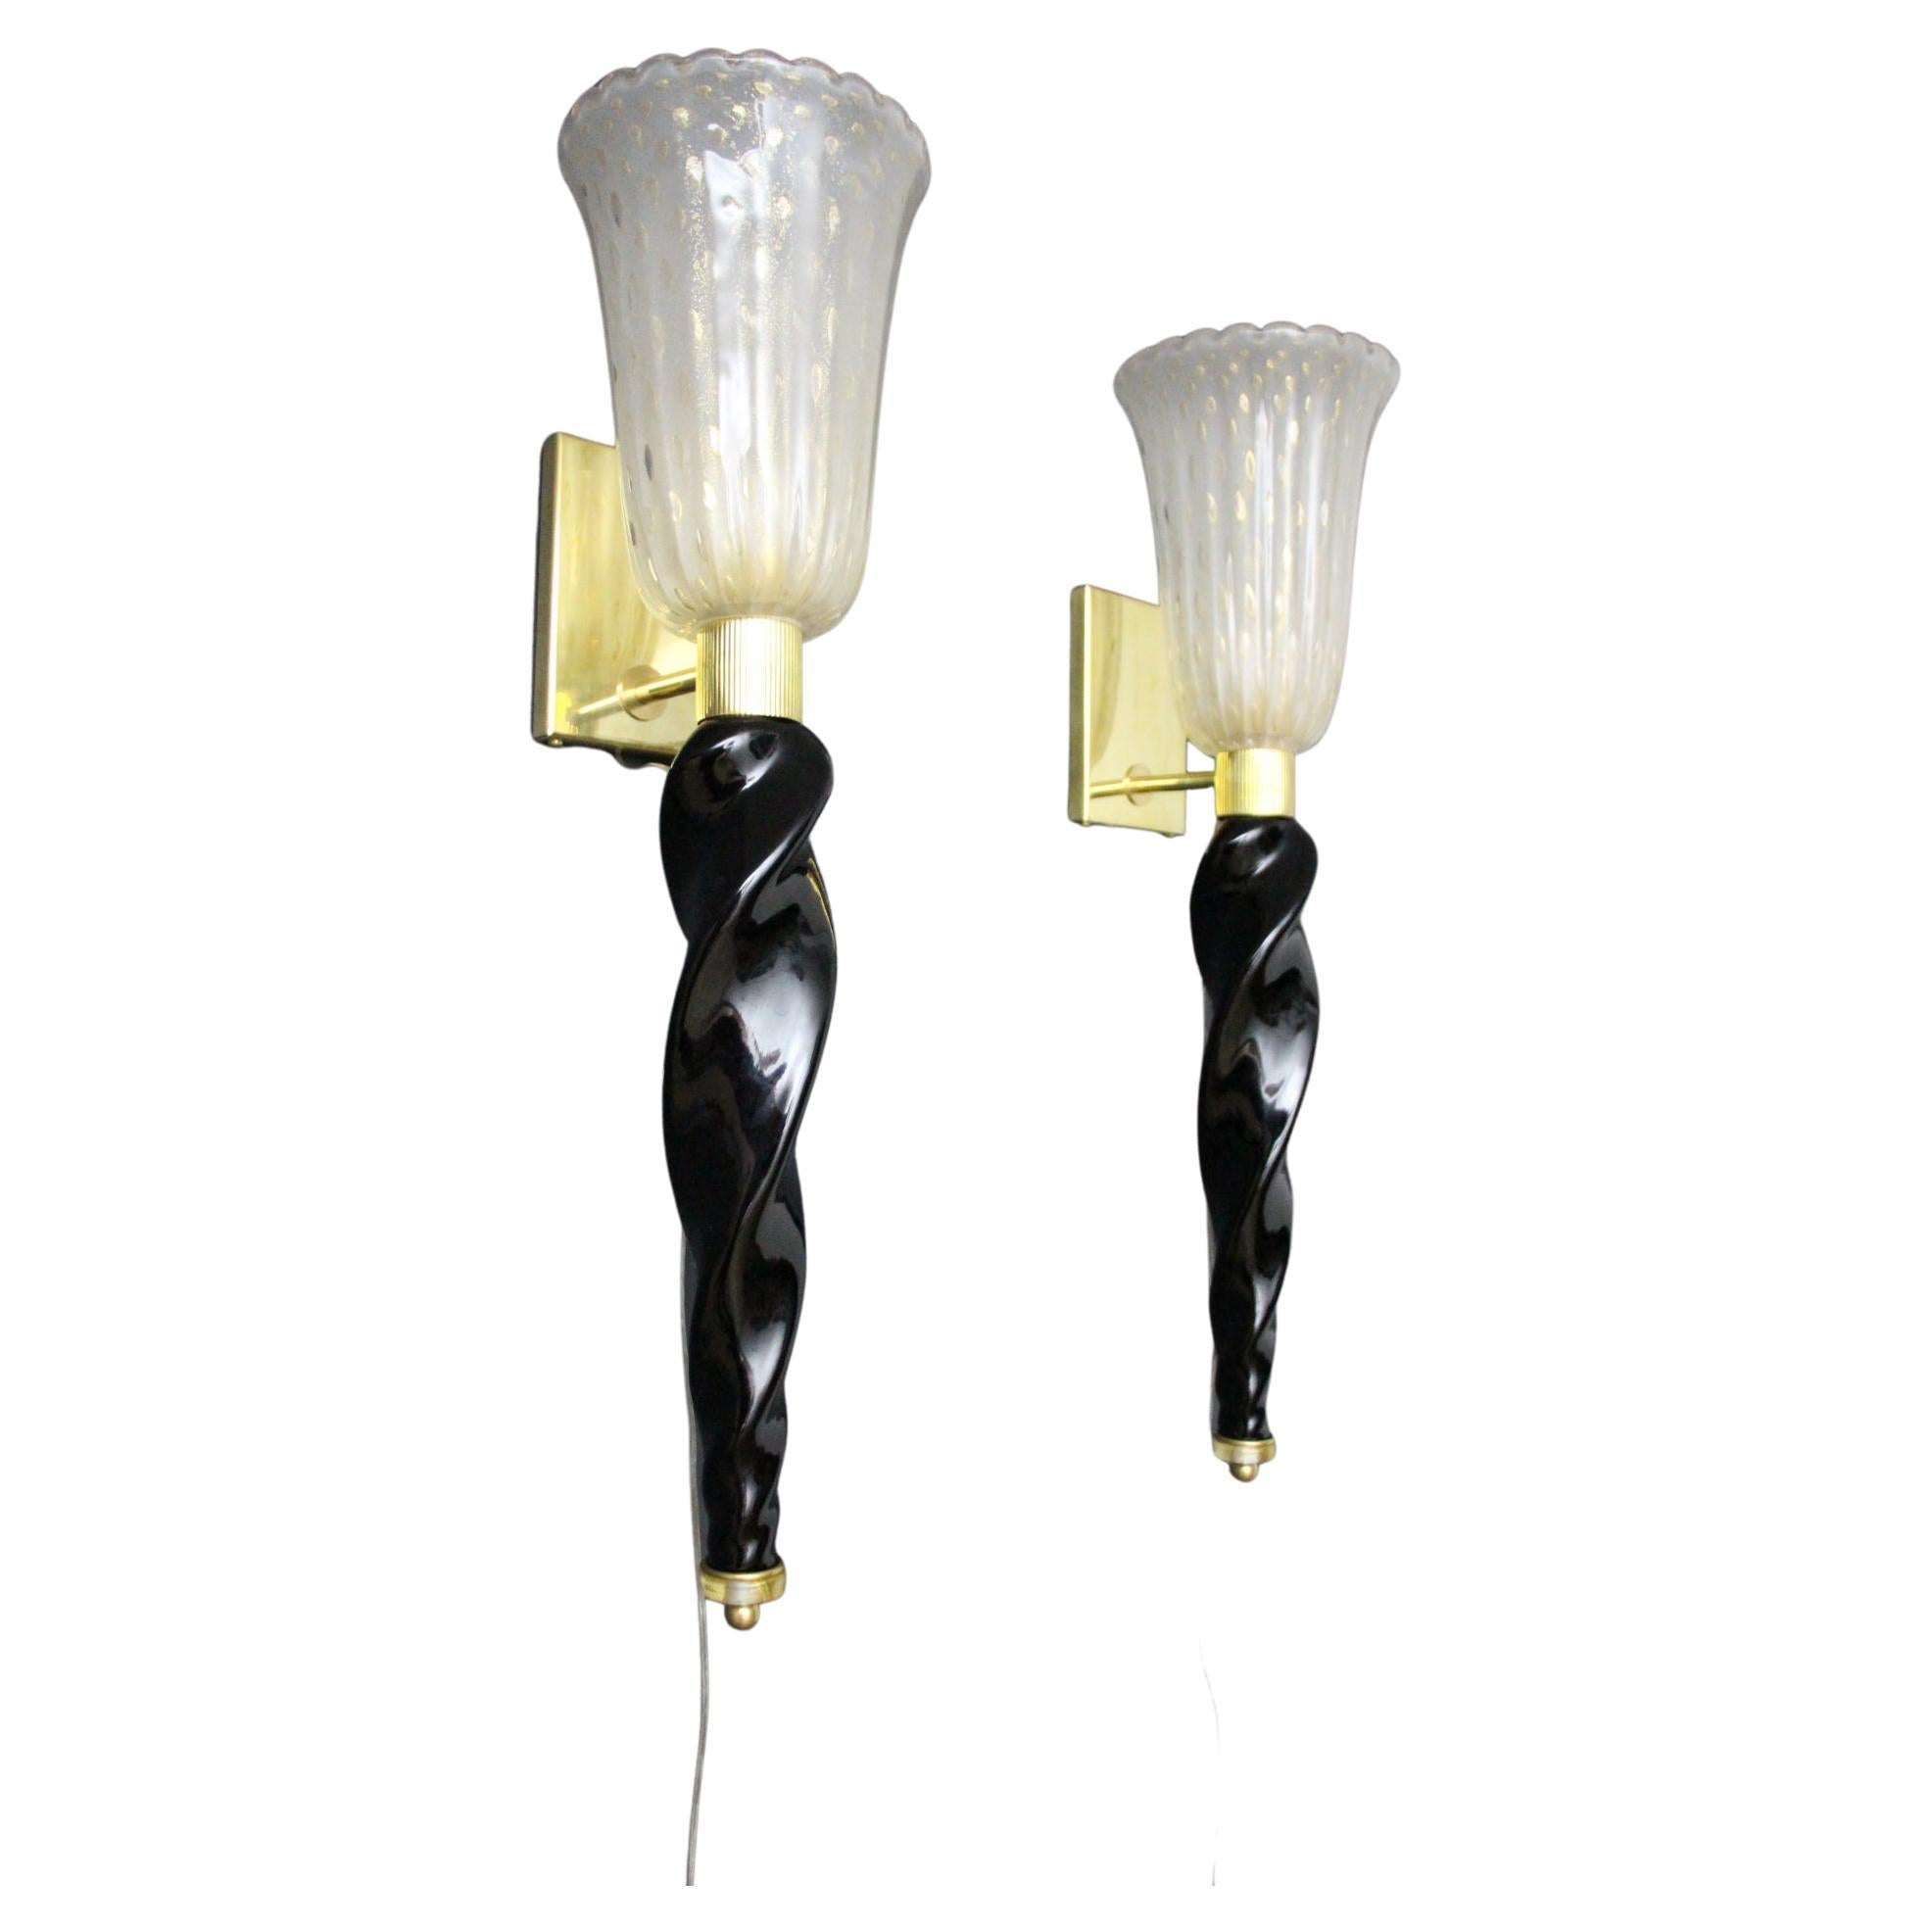 Barovier Style Murano Pulegoso Gold and Black Glass Sconces , Torchere Sconces For Sale